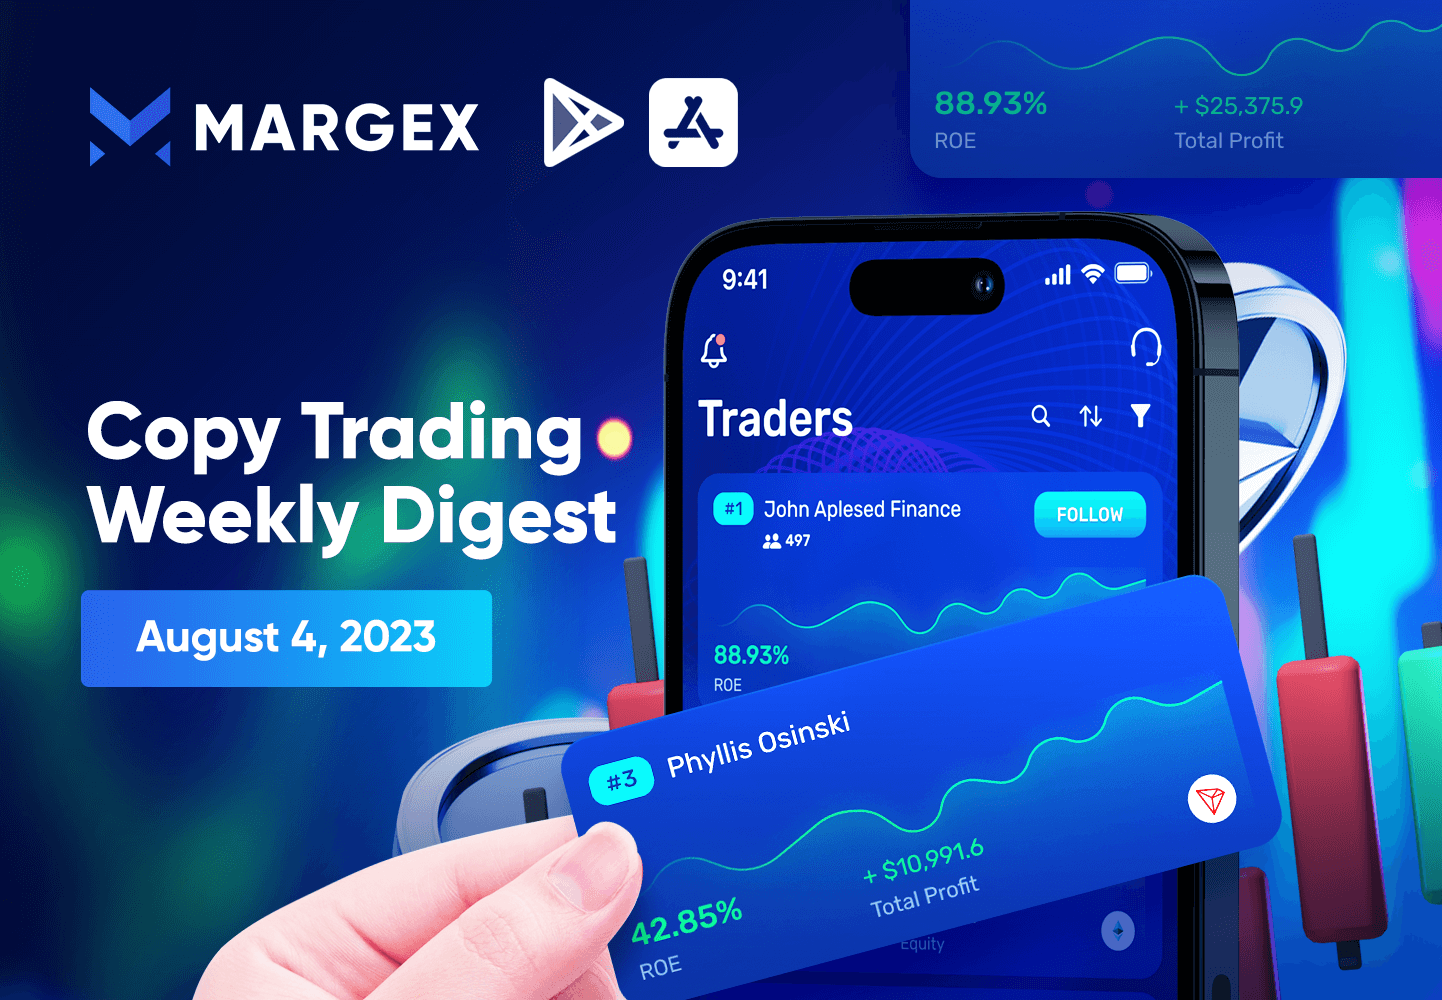 Copy Trading Weekly Digest: August 4, 2023